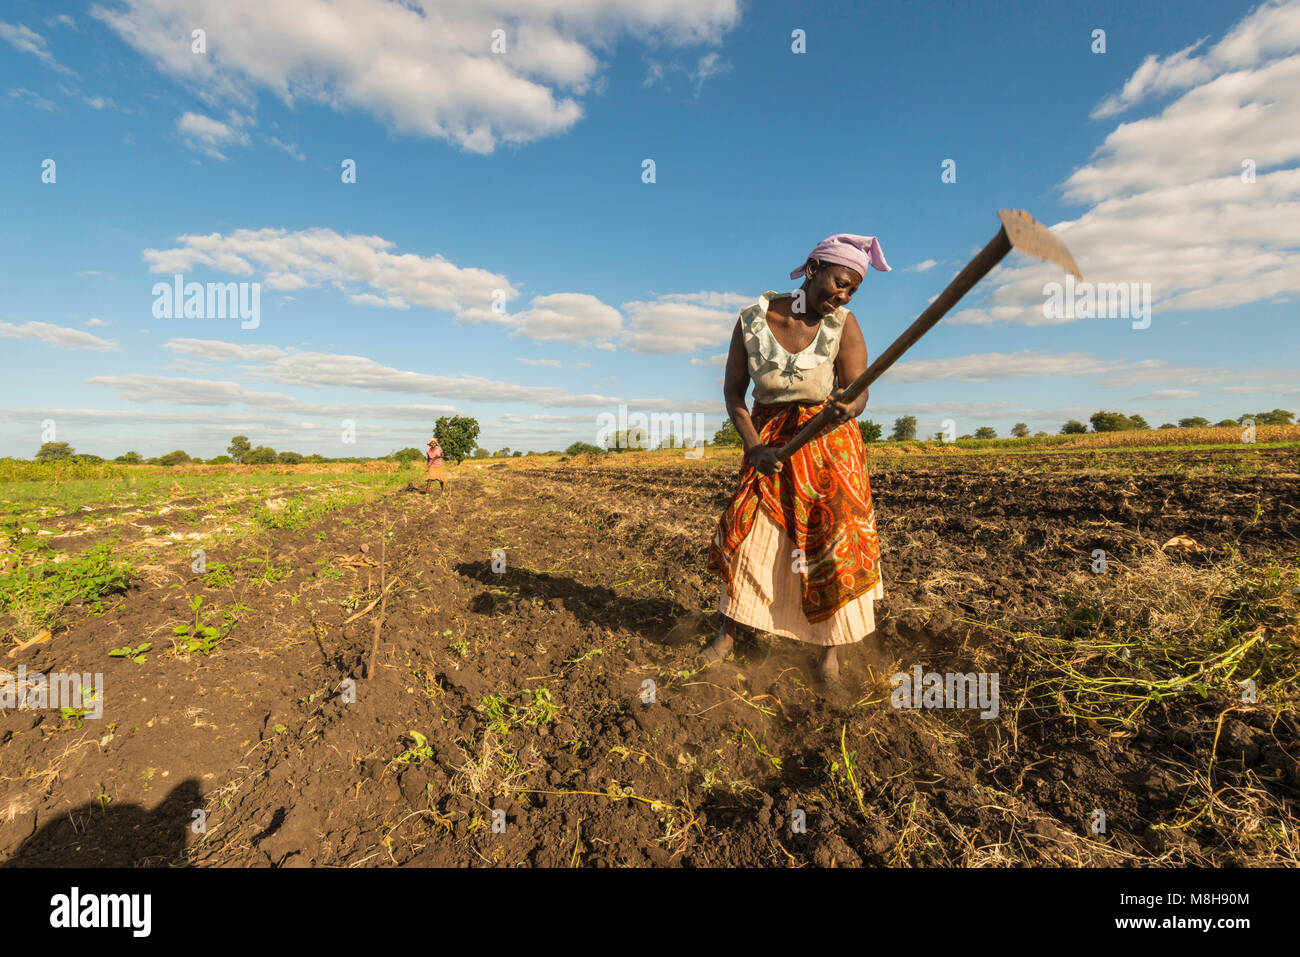 Woman plough a field with hoes in Zimbabwe. Stock Photo